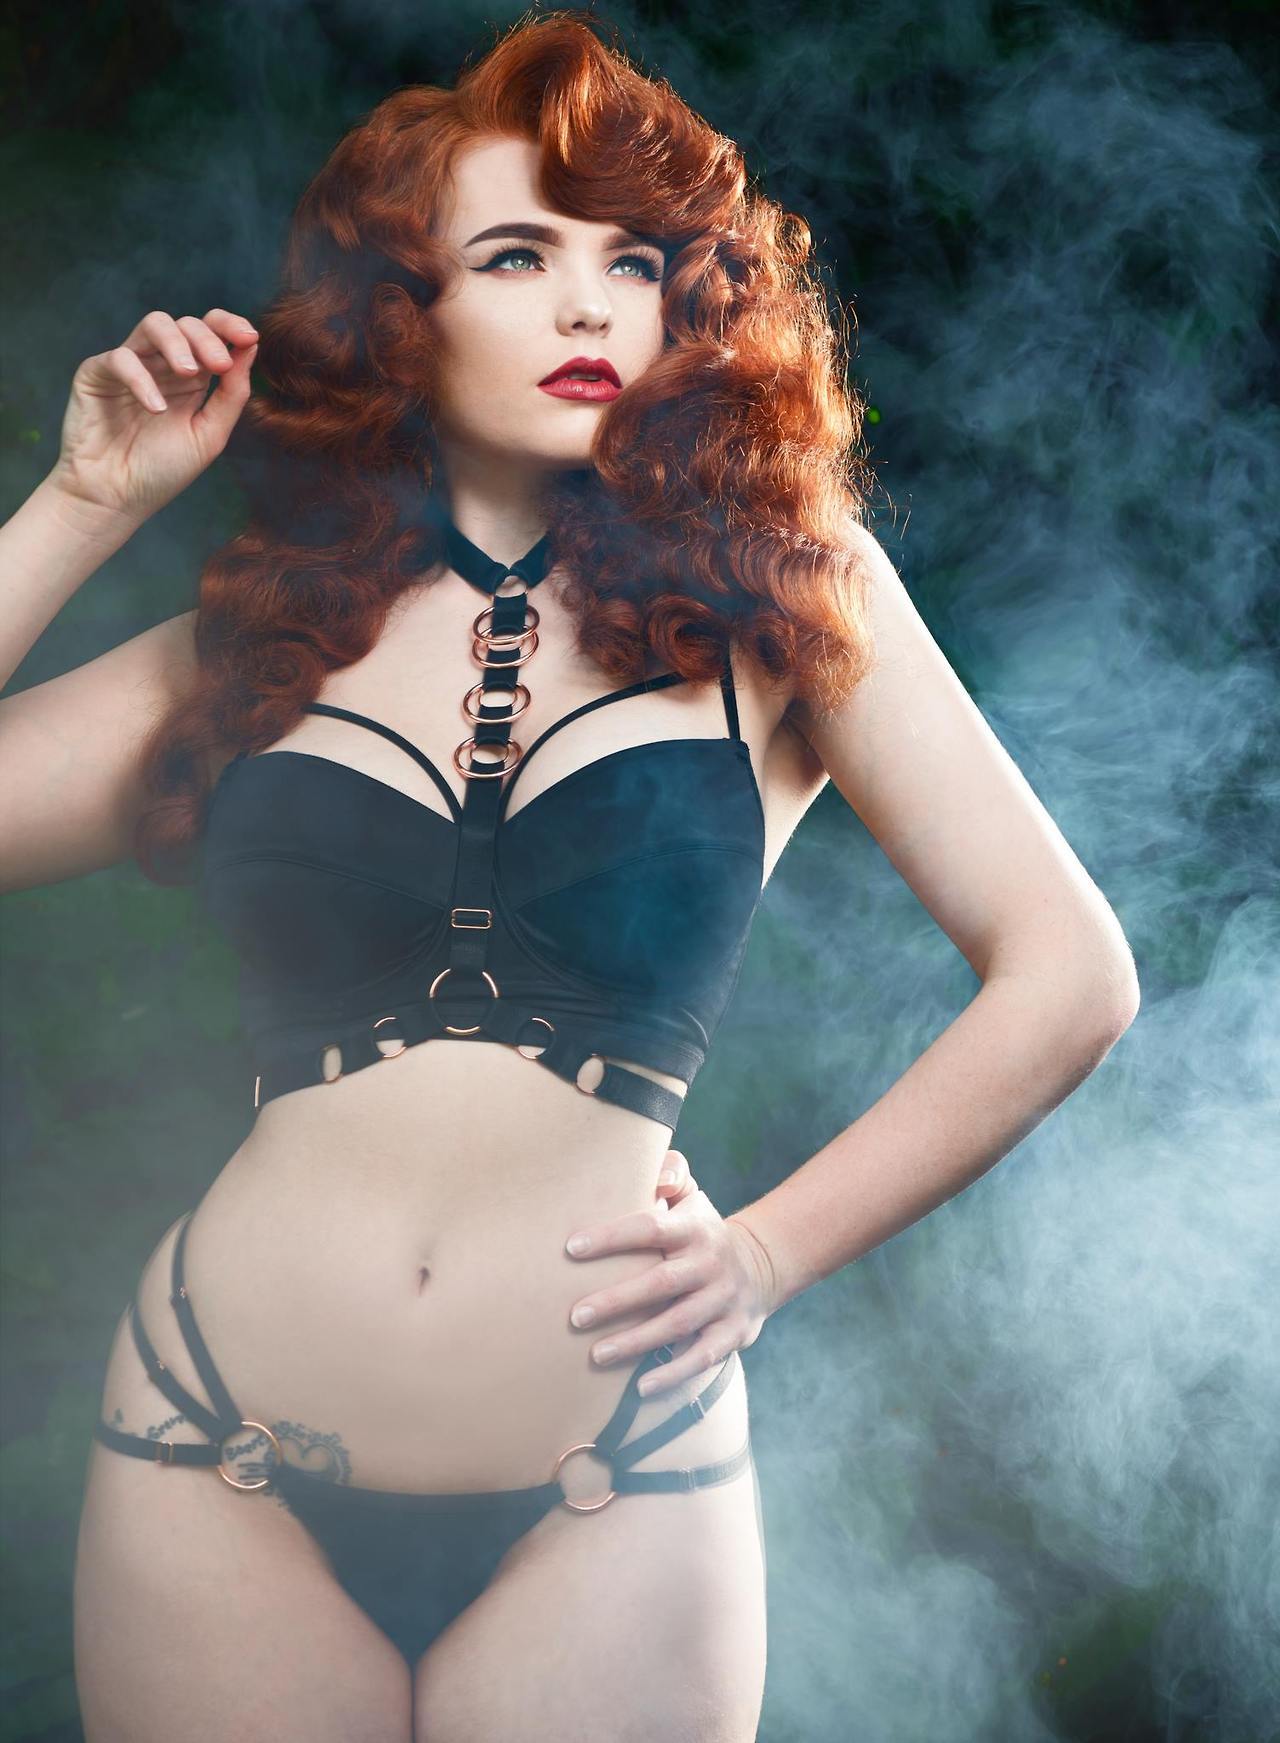 miss-deadly-red: Here tumblr see it first!! 😍❤    Photography/Retouch: Matt